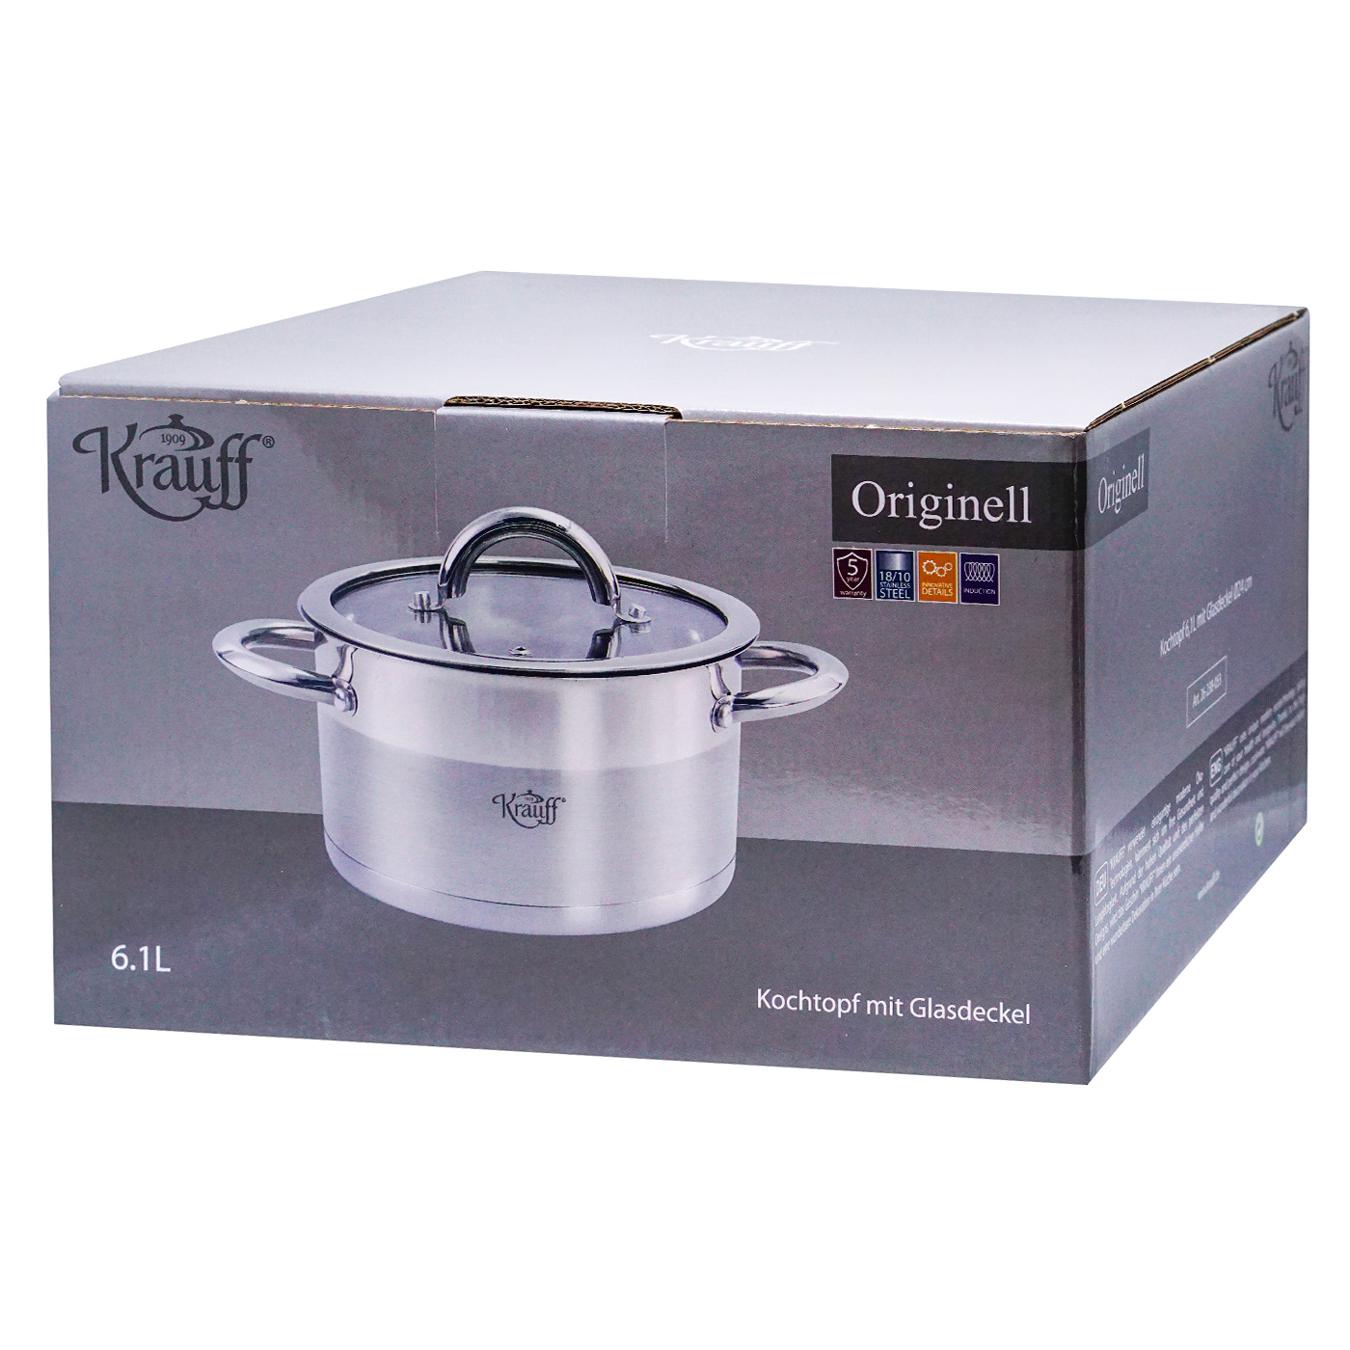 Krauff saucepan with a glass lid and metal handles 6.1 l